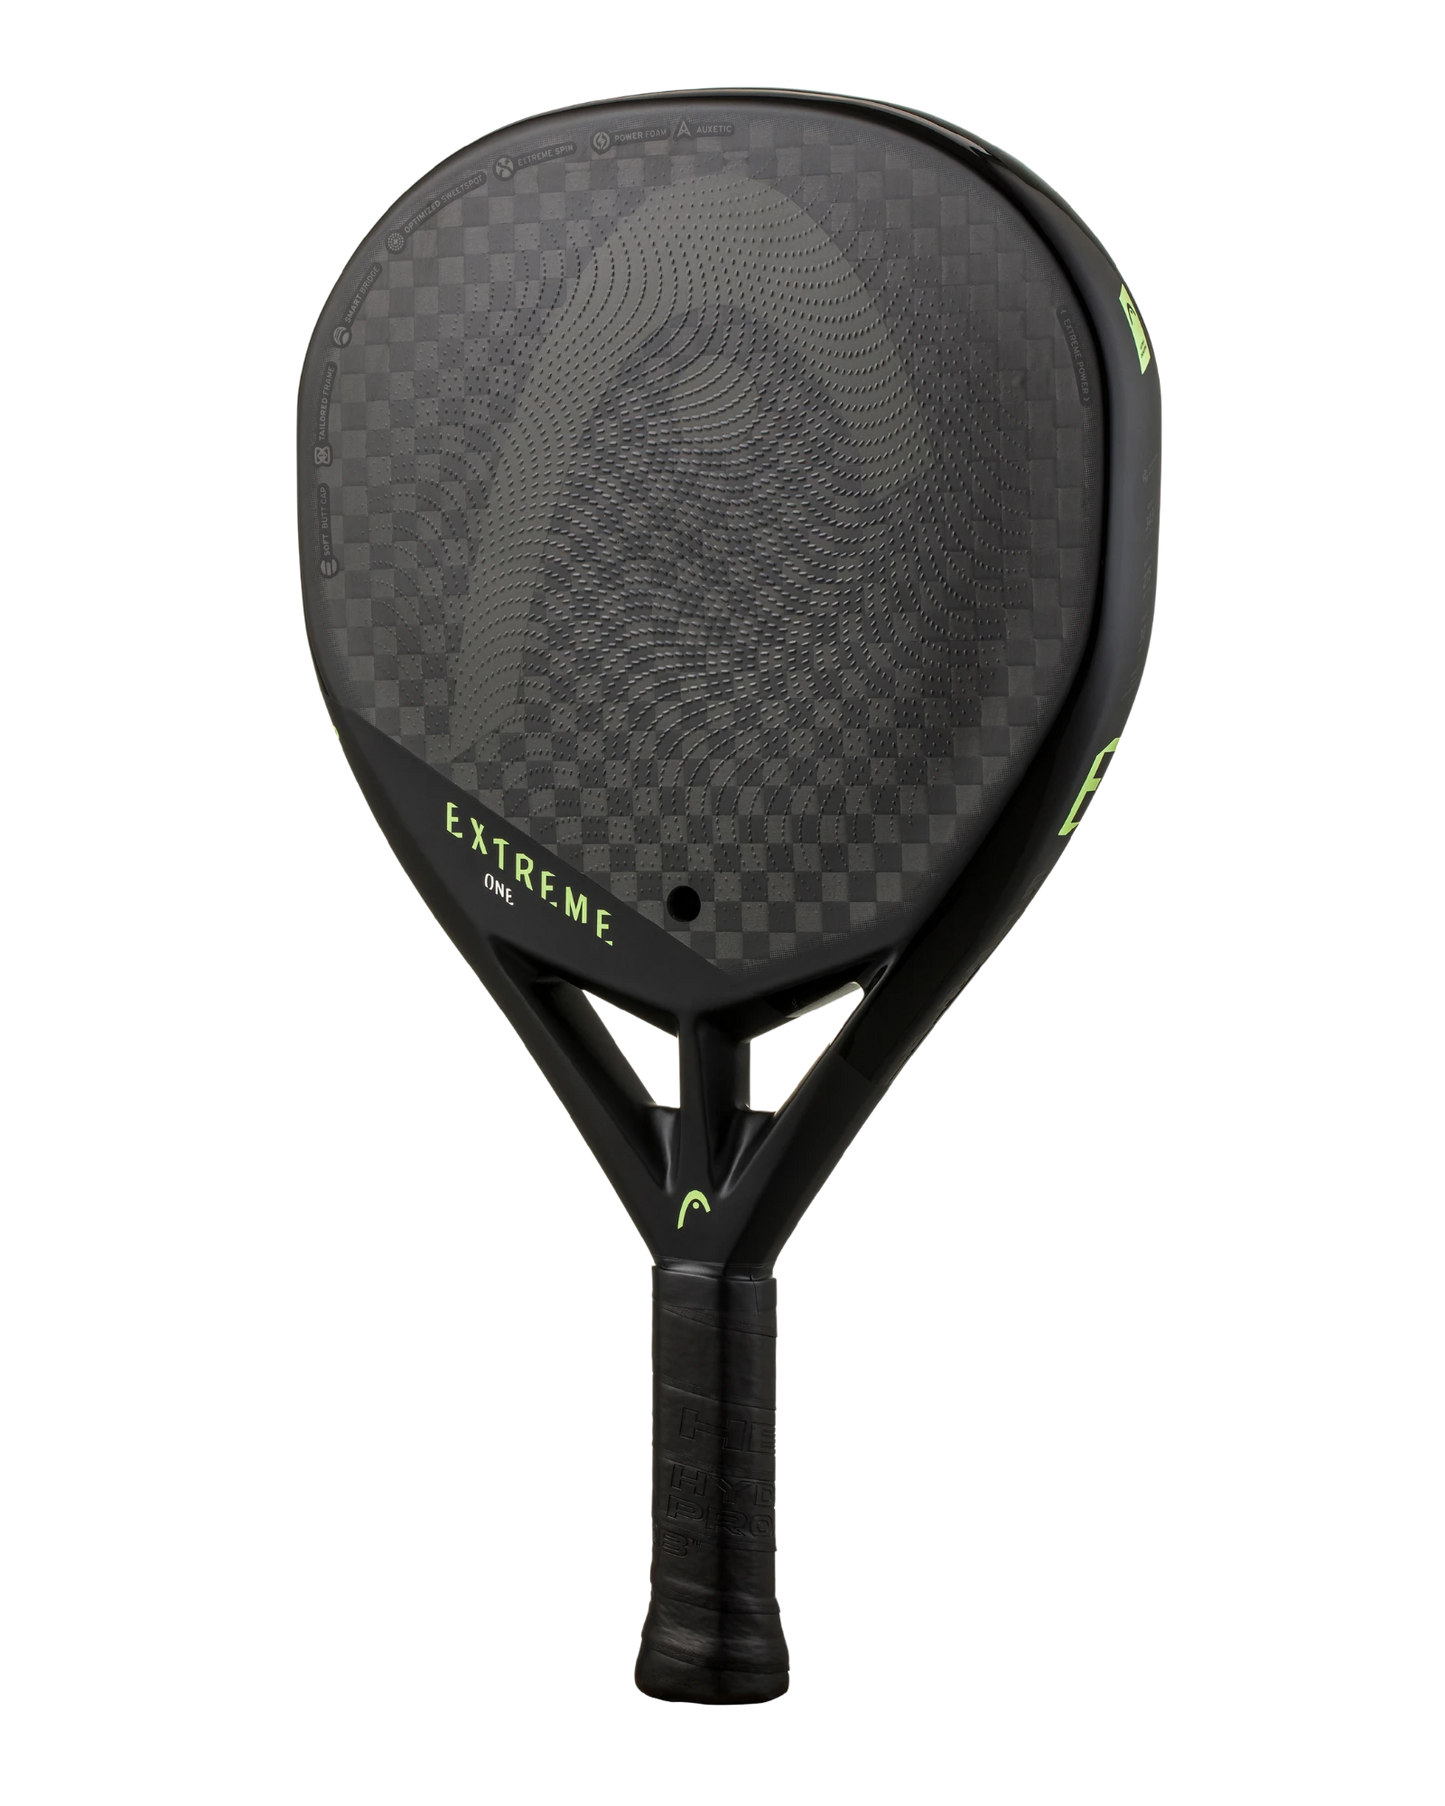 The Head Extreme One Padel Racket